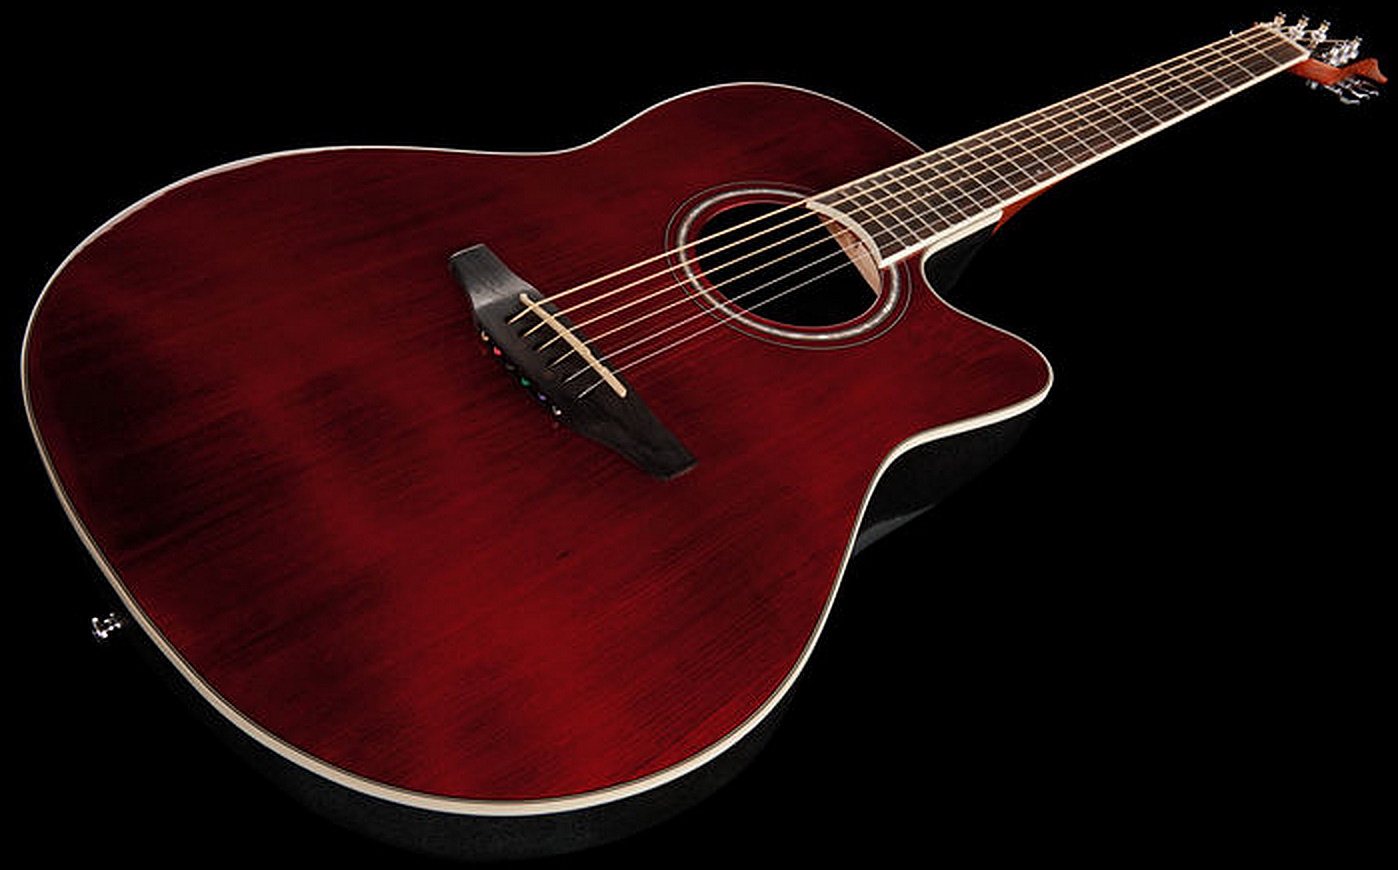 Ovation Cs24-rr Celebrity Standard Mid Depth Cw Epicea Lyrachord Rw - Ruby Red - Guitare Electro Acoustique - Variation 2